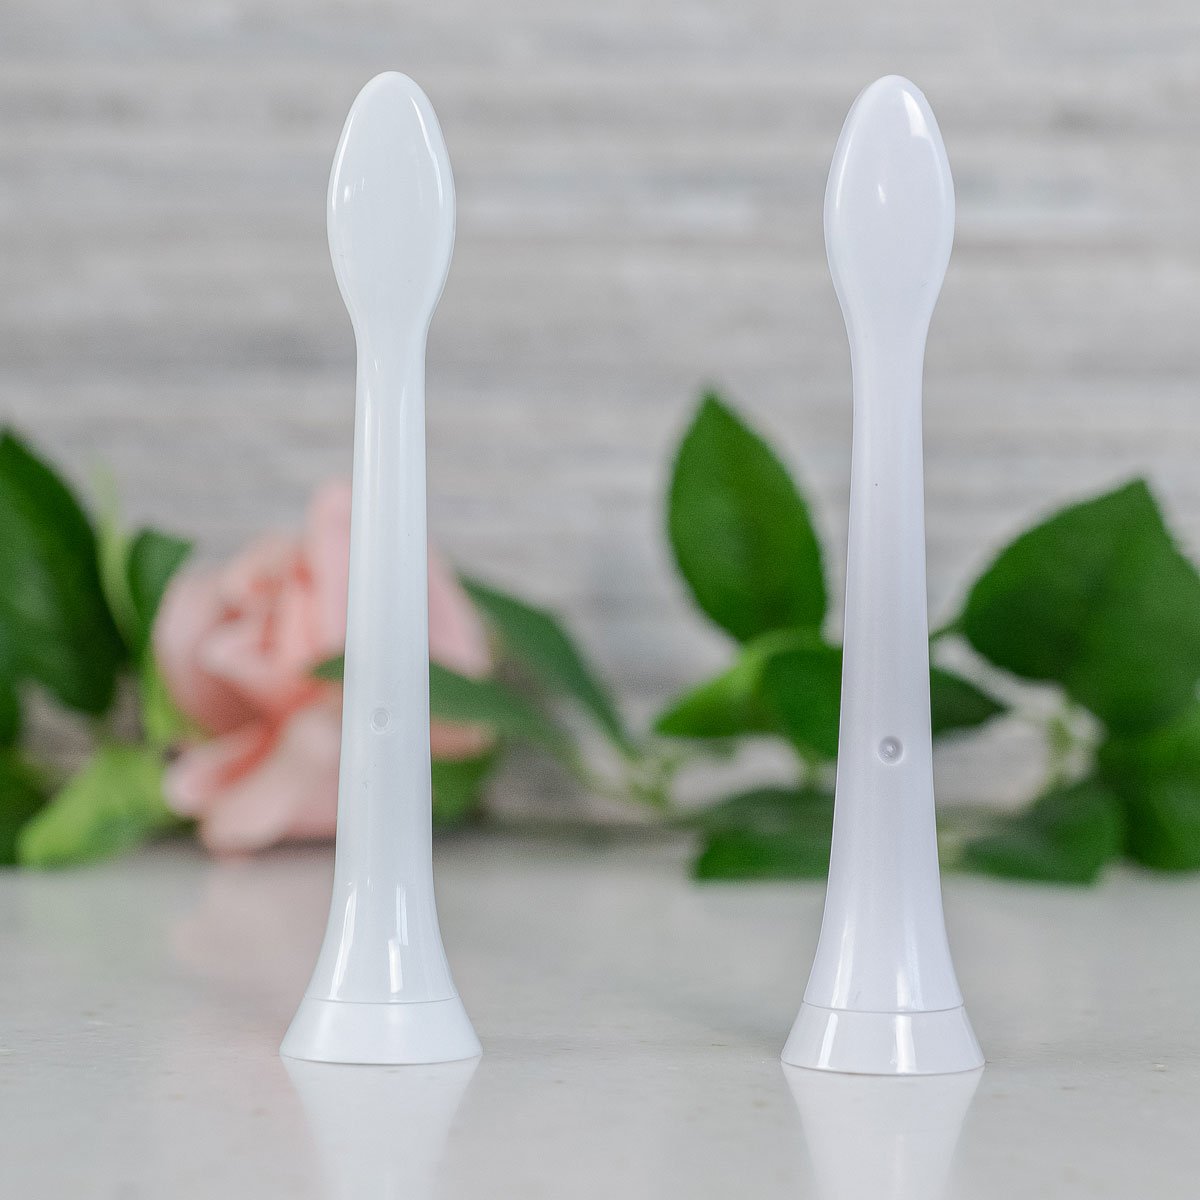 Real vs fake Sonicare brush head from the backside